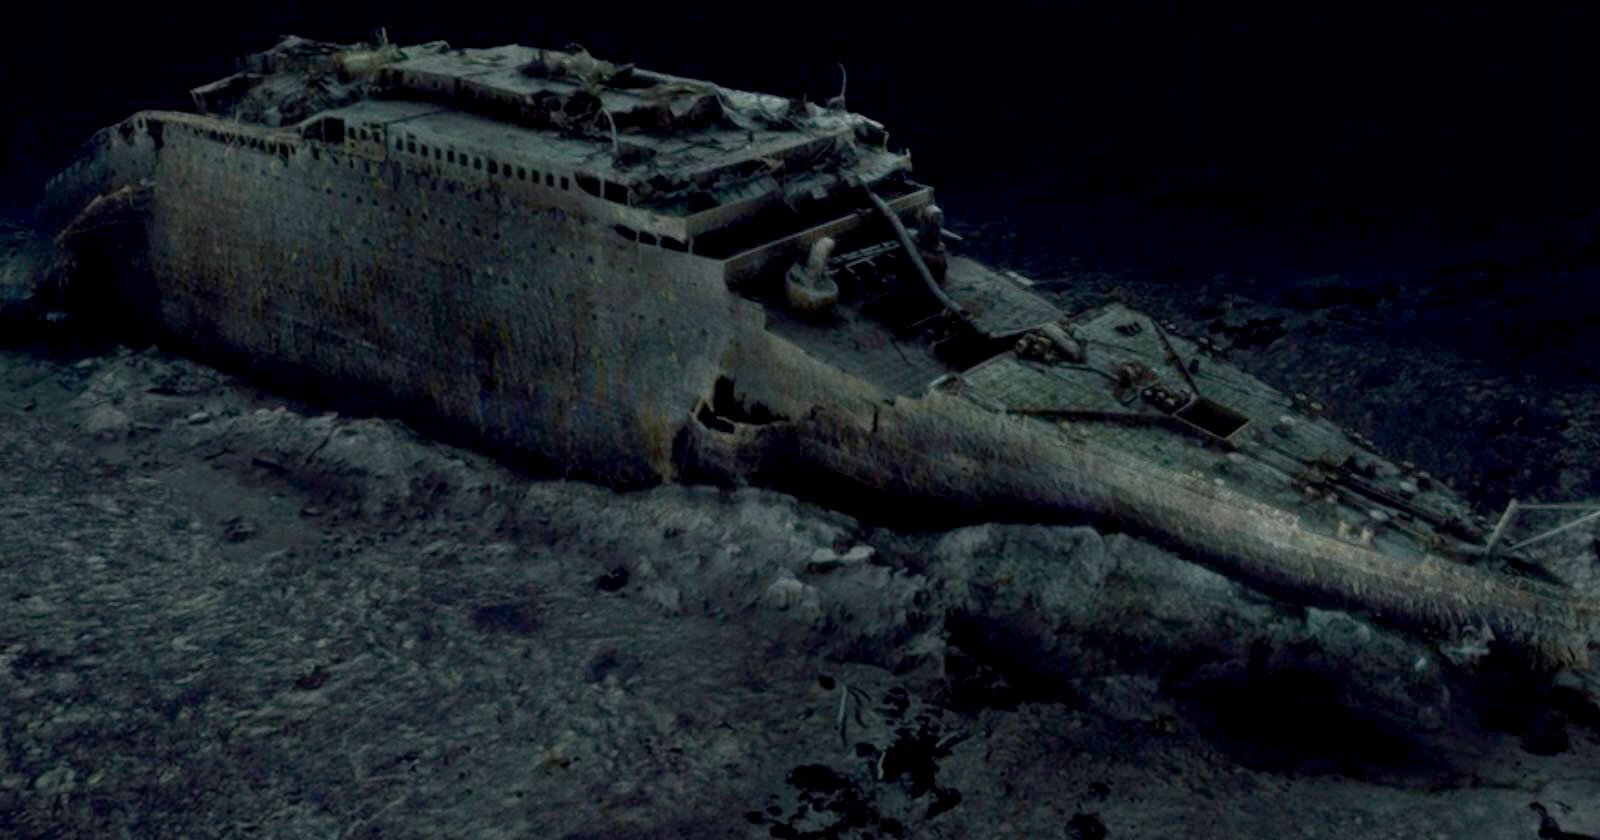 First Full-Sized Scans of Titanic Reveal Shipwreck in Unprecedented Detail